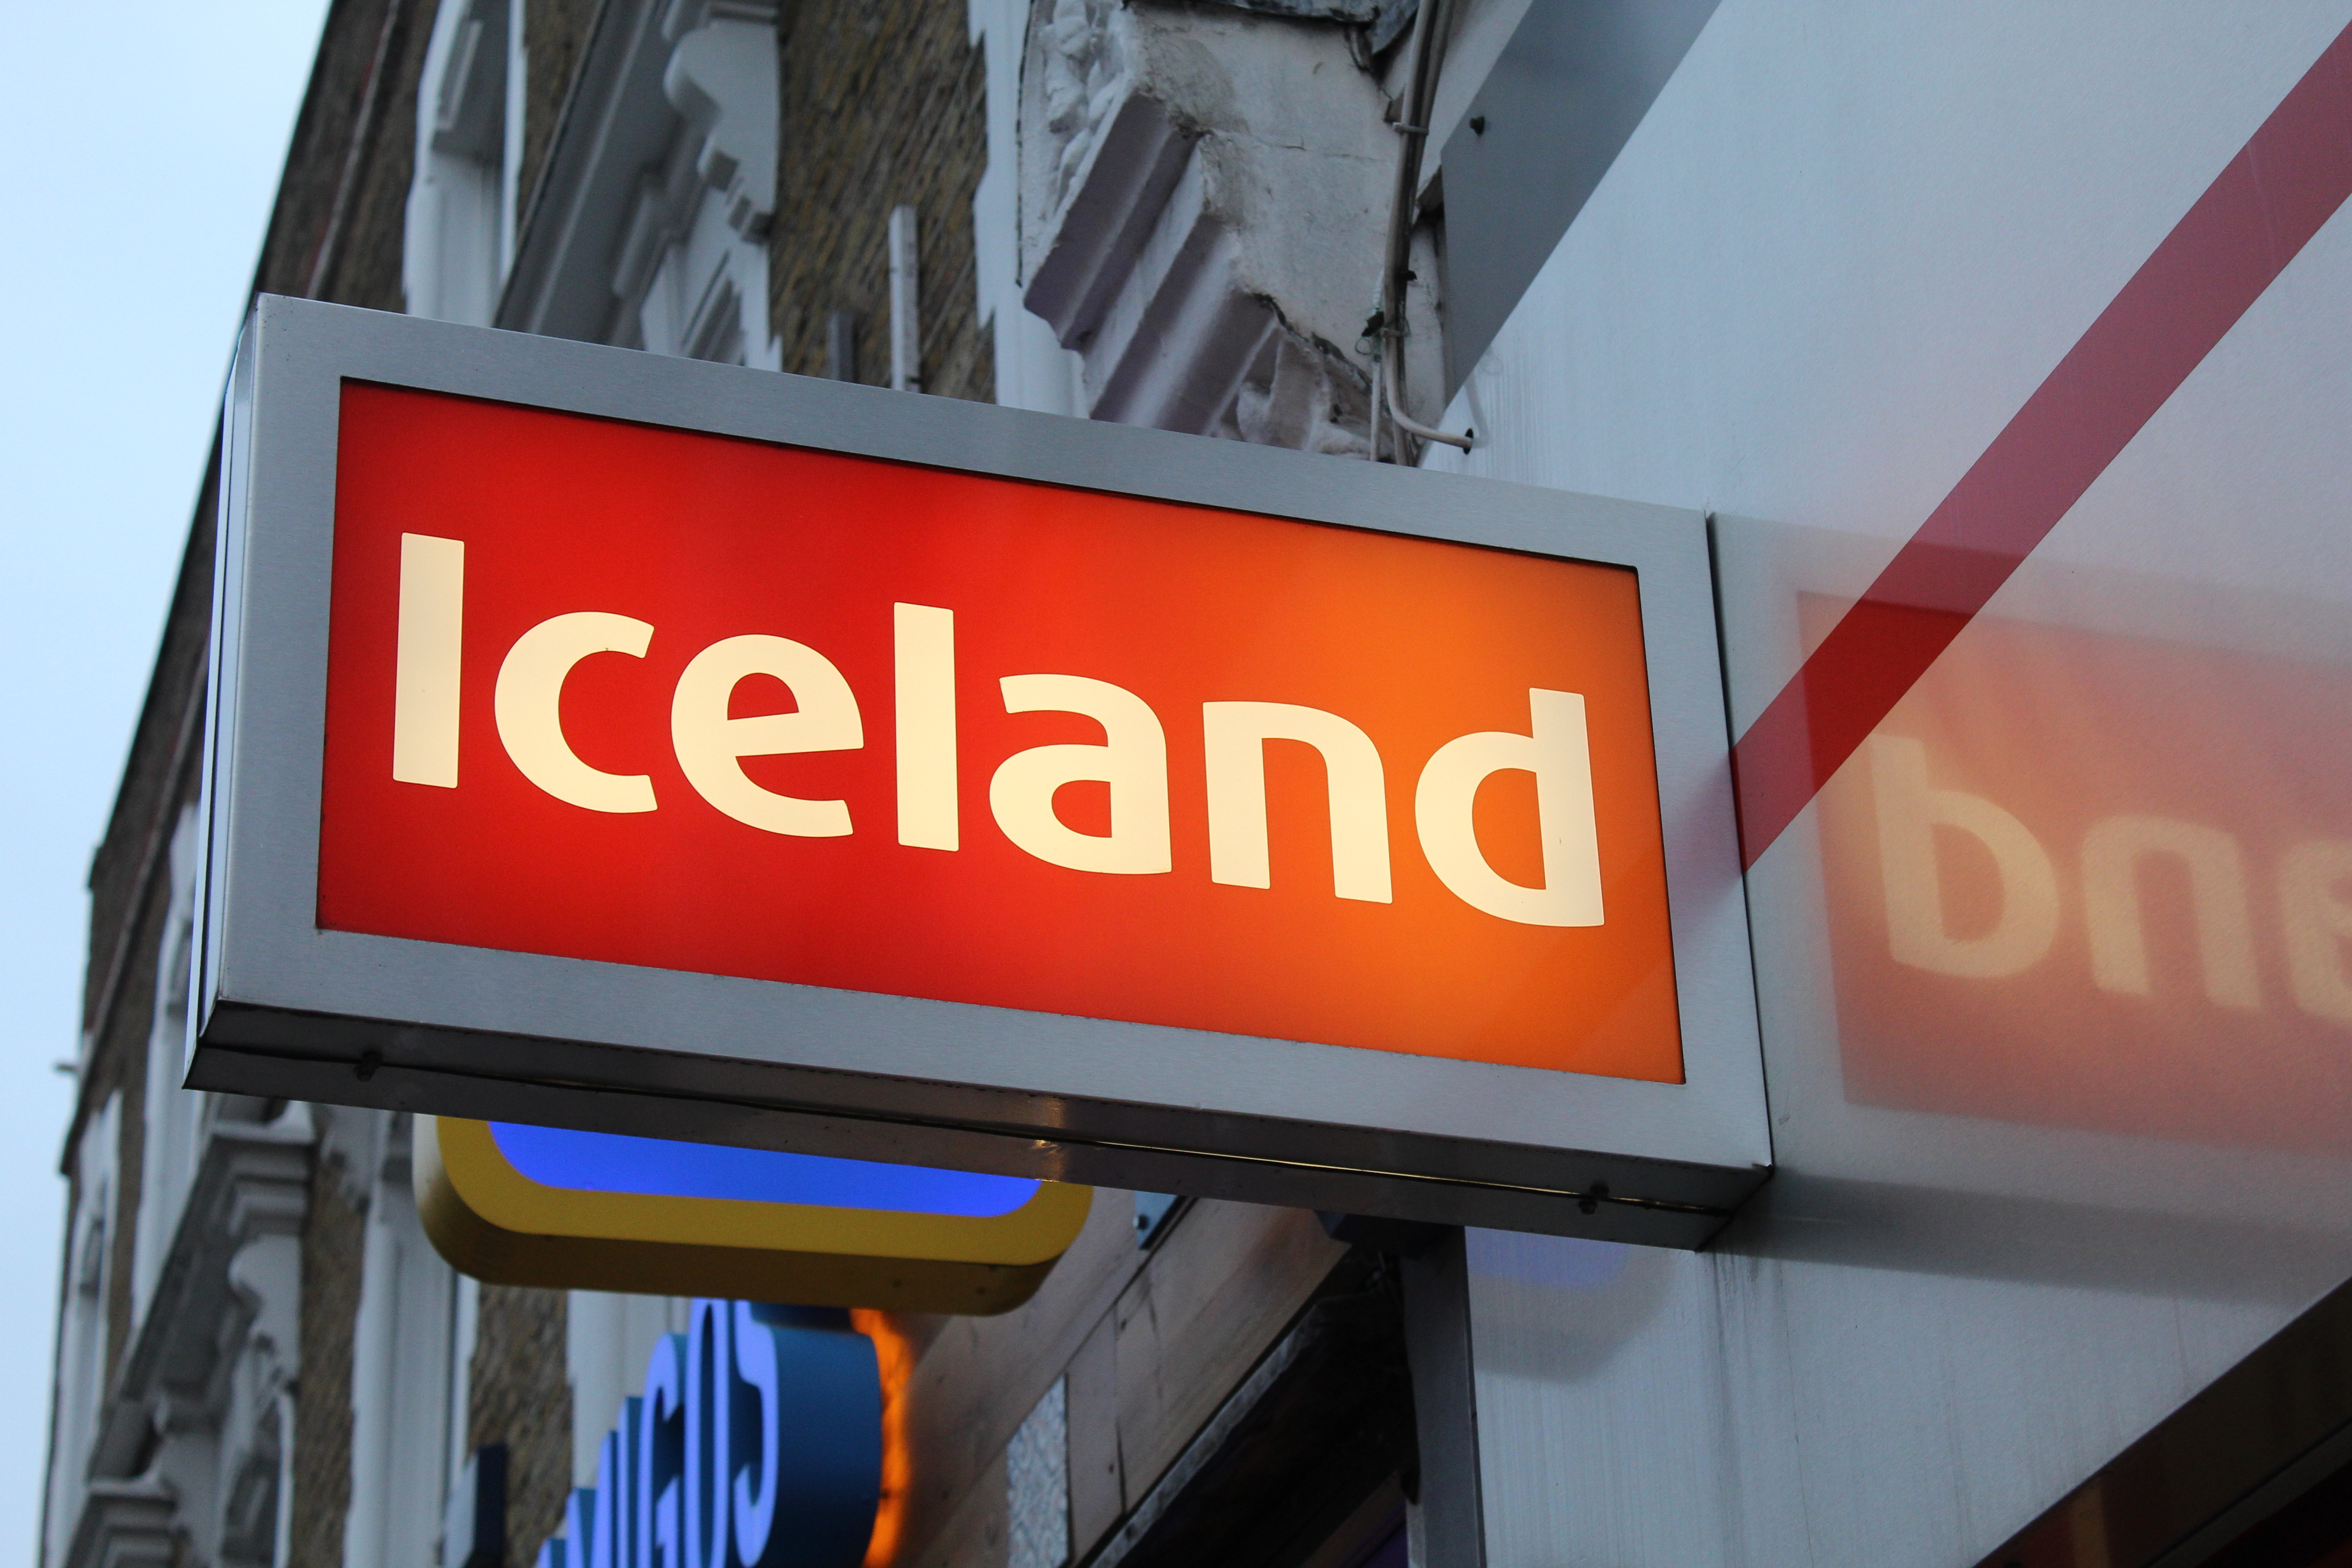 Families have the chance to get their hands on up to £300 to spend at Iceland